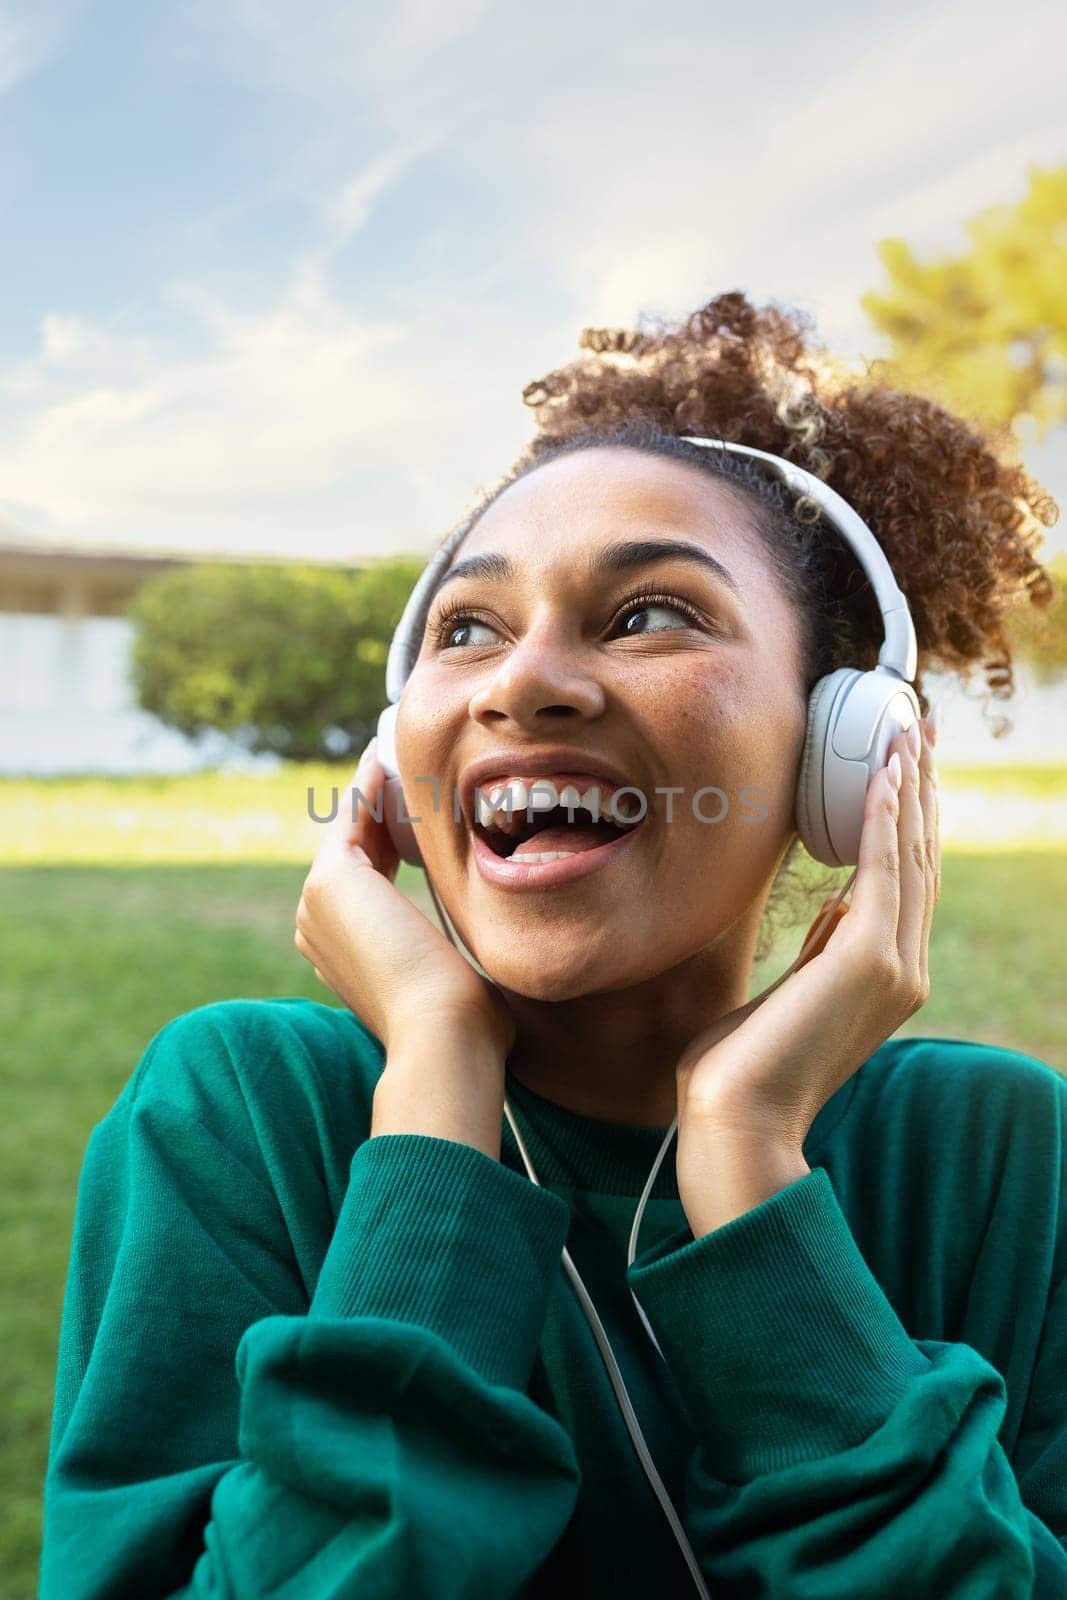 Vertical portrait of happy African American young woman listening to music using headphones. Lifestyle concept.